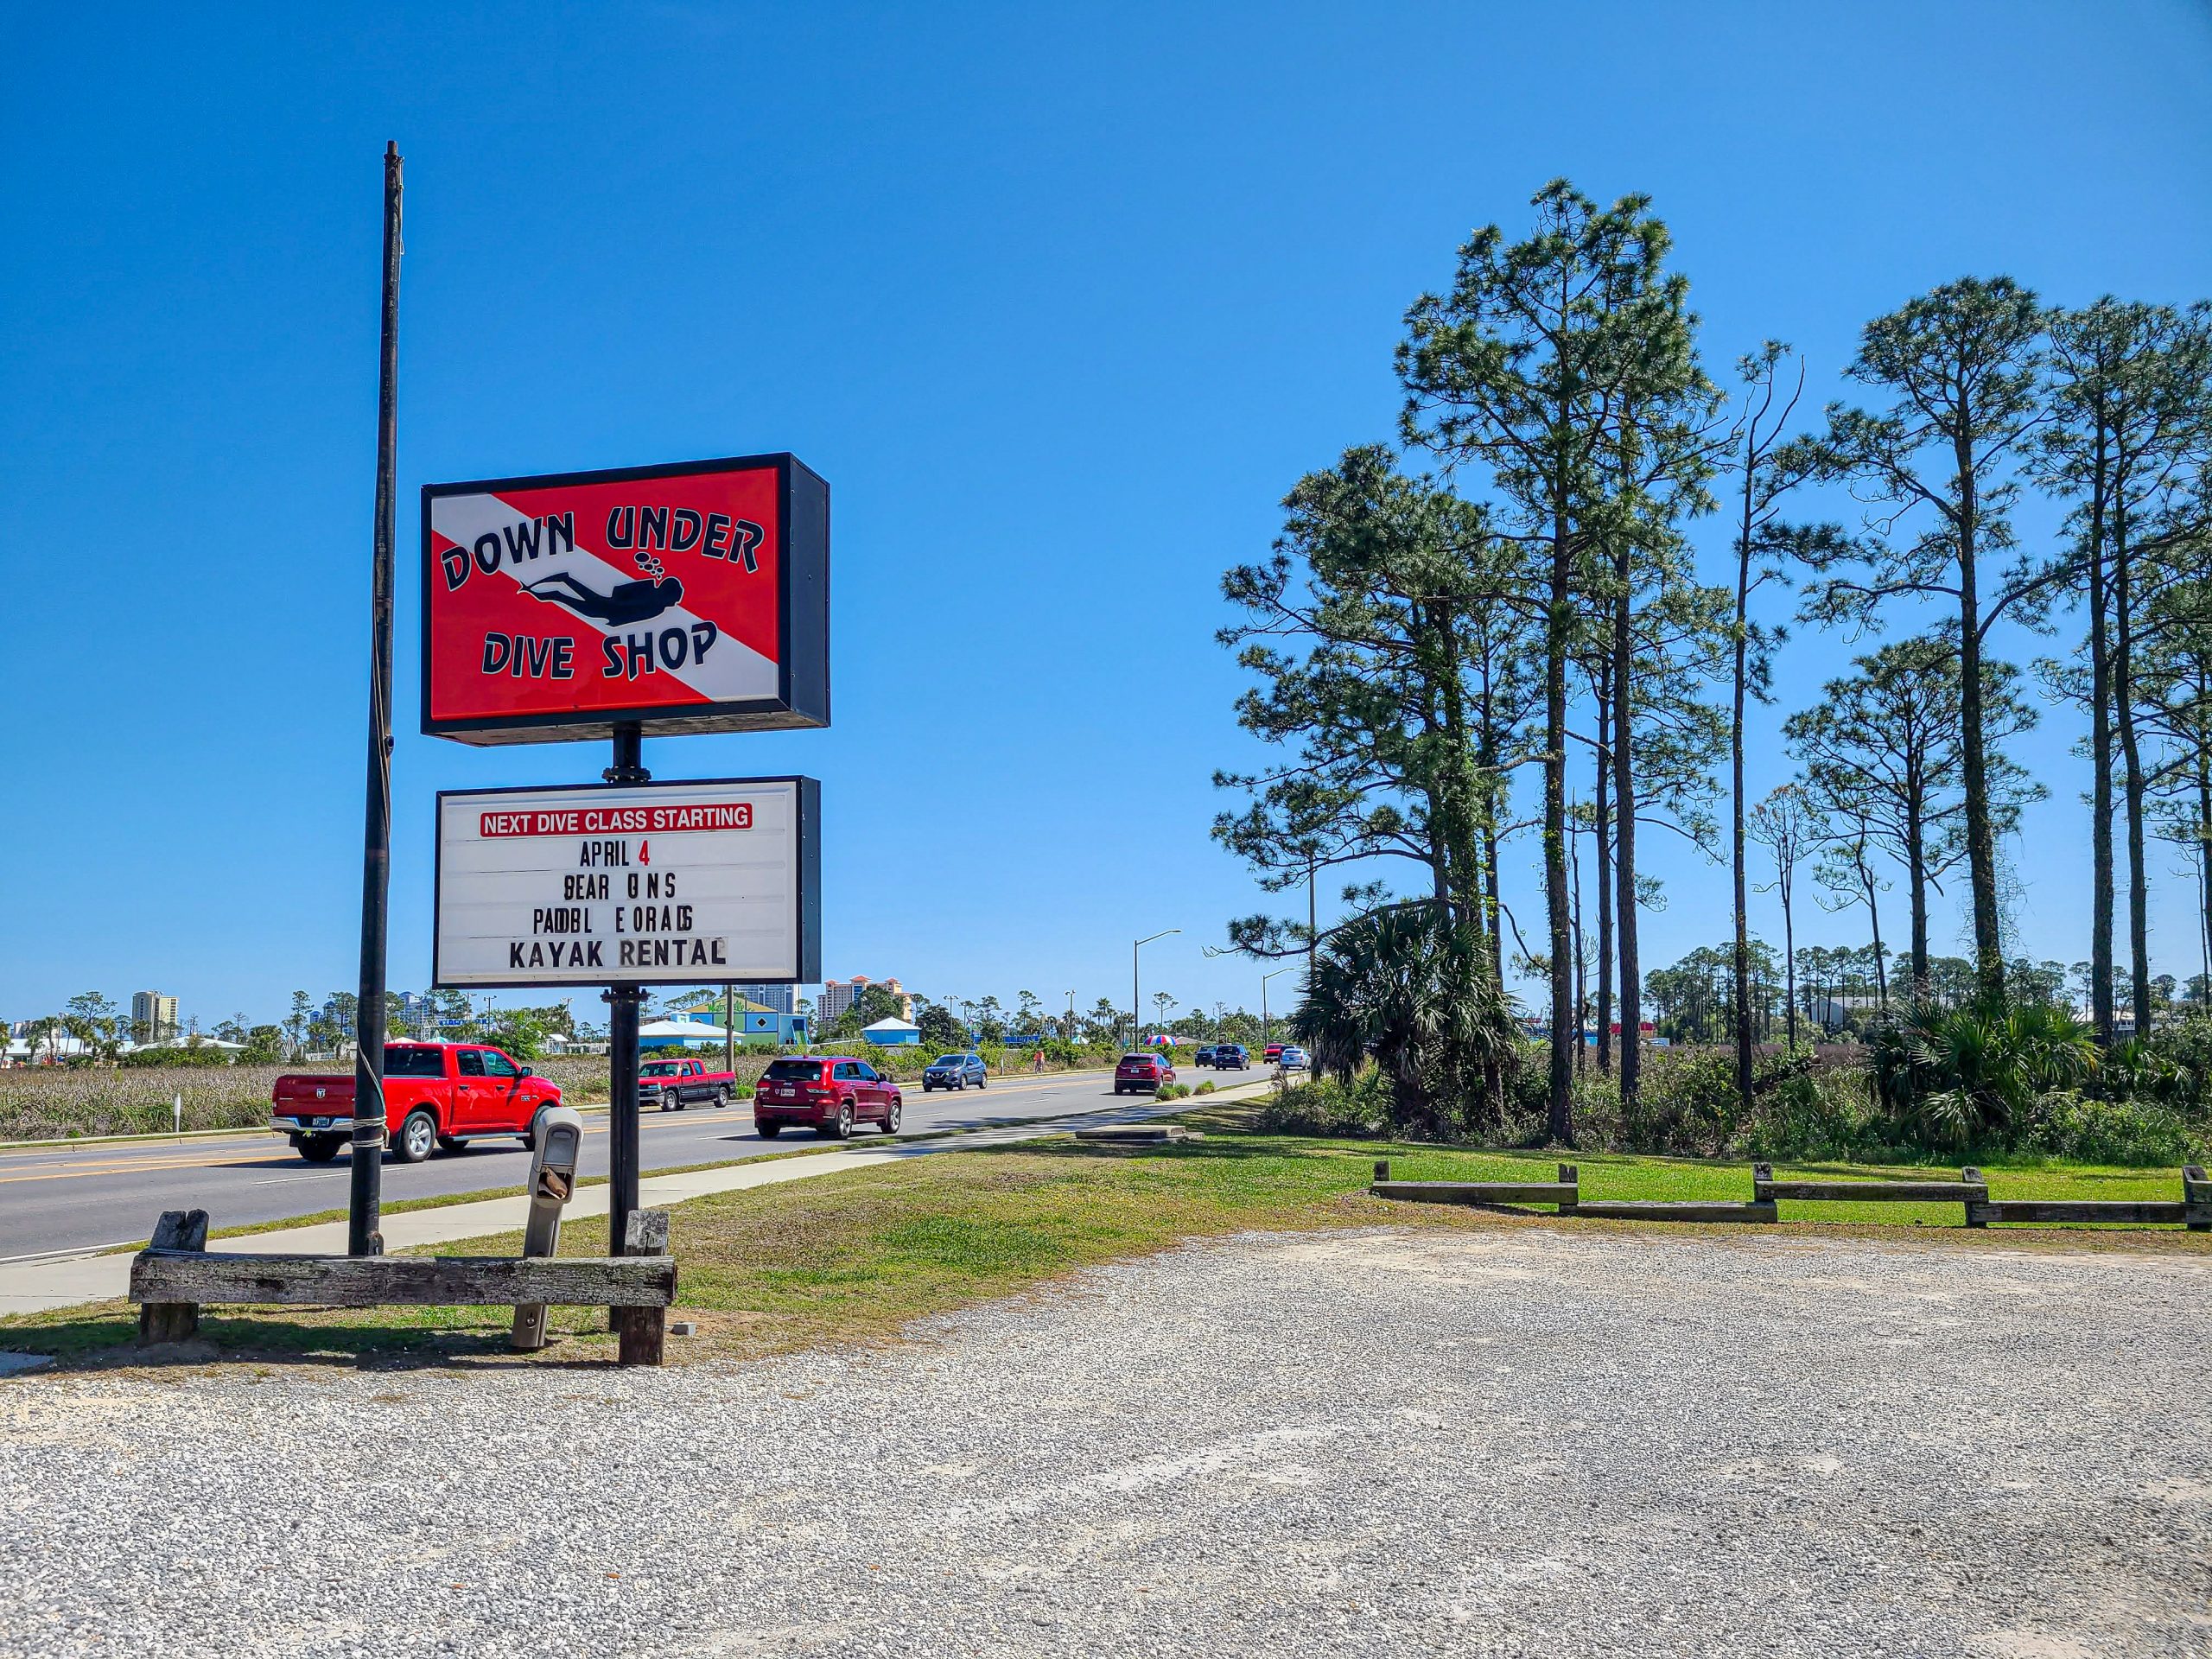 Scuba Diving in Gulf Shores - Concierge Review of the Down Under Dive Shop